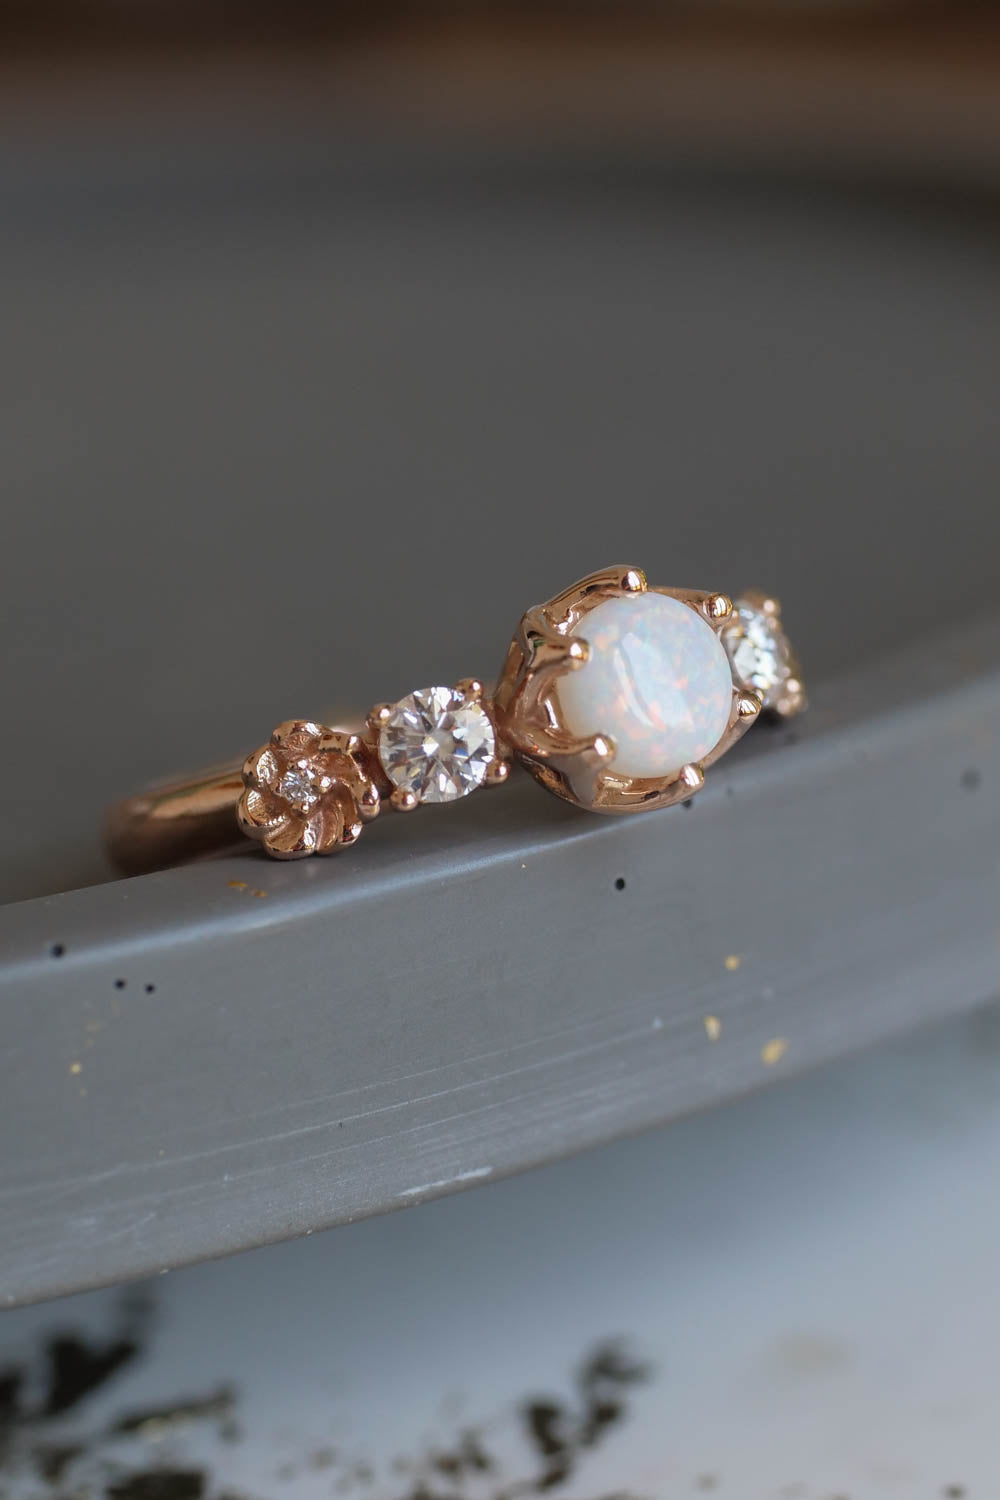 White fire opal promise ring, floral engagement ring / Fiorella - Eden Garden Jewelry™